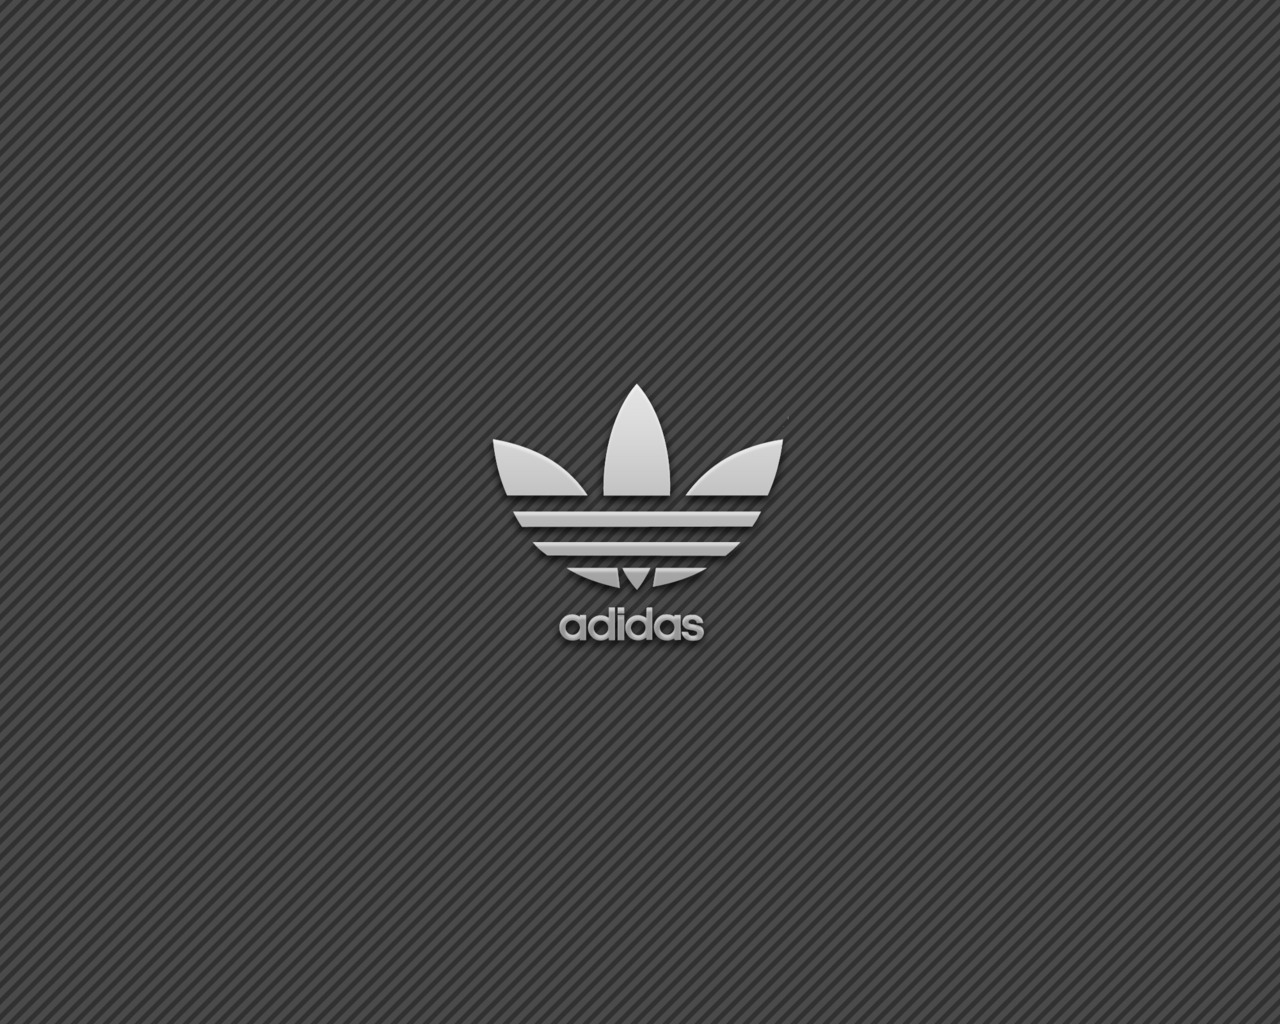 Adidas Simple Logo Background for 1280 x 1024 resolution